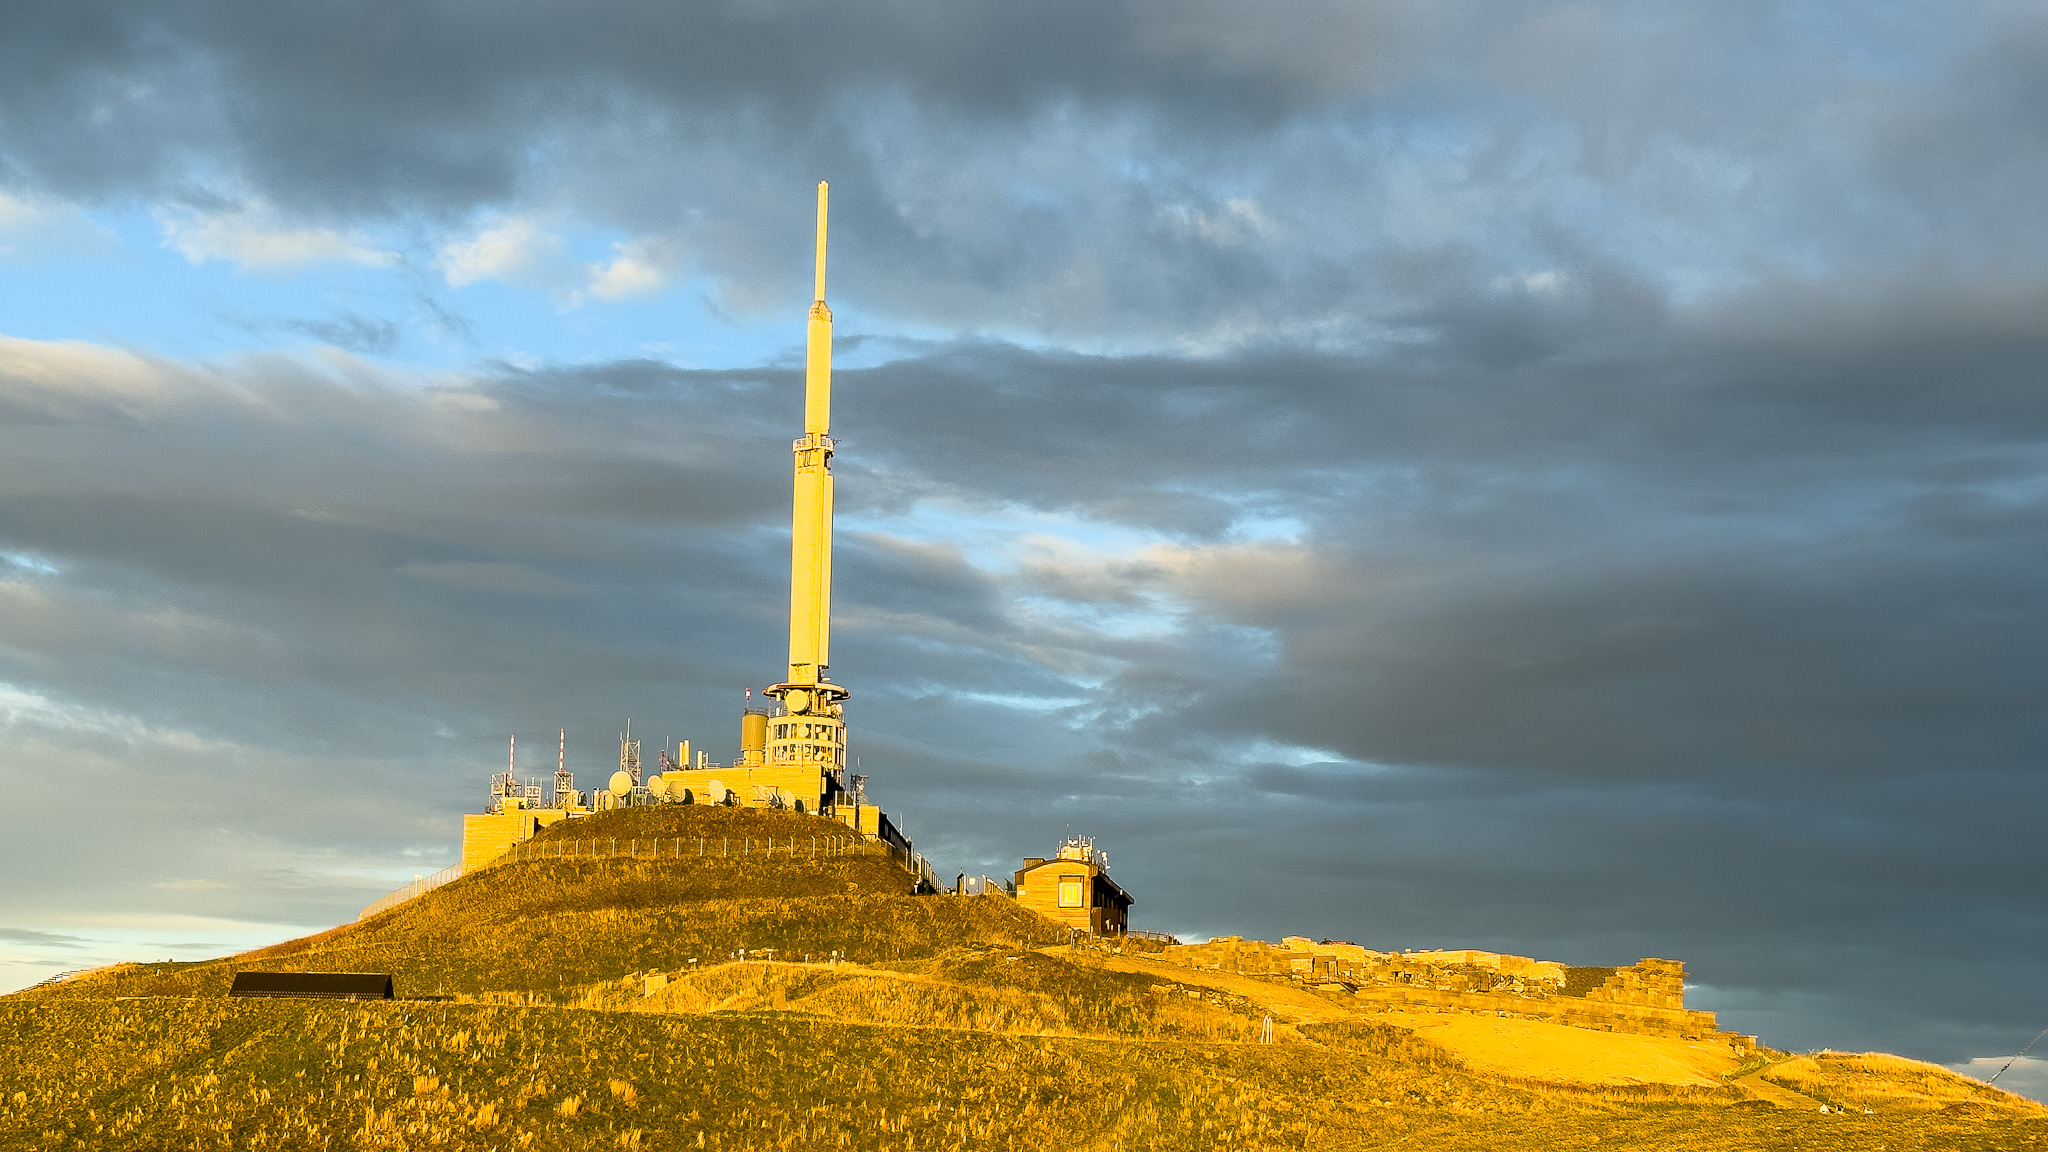 Sunset at the top of the Puy de Dôme